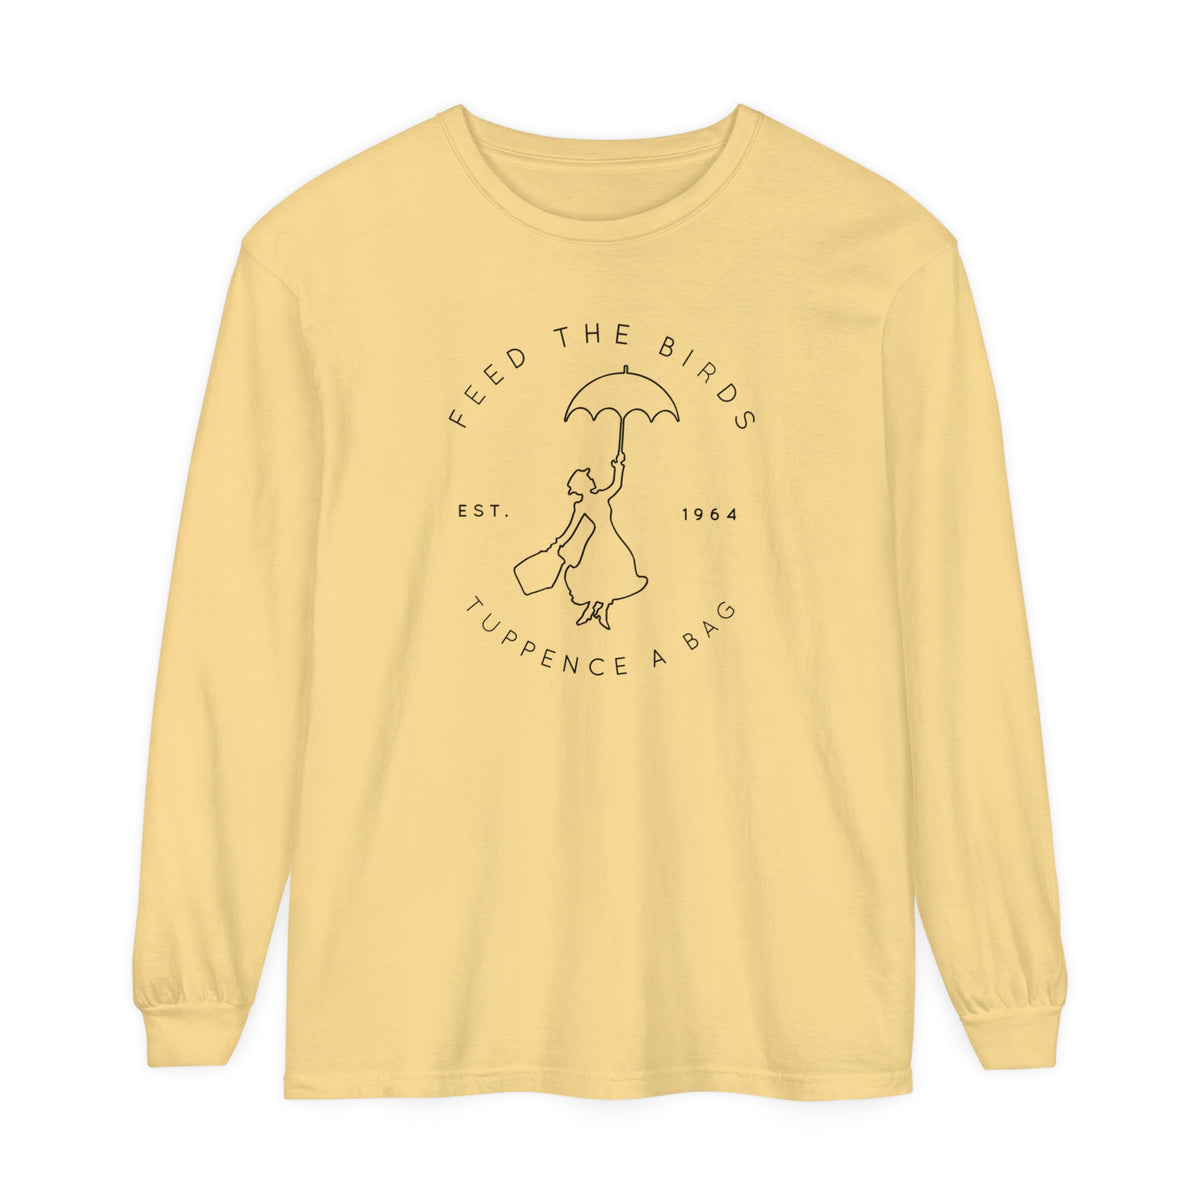 Feed The Birds Comfort Colors Unisex Garment-dyed Long Sleeve T-Shirt